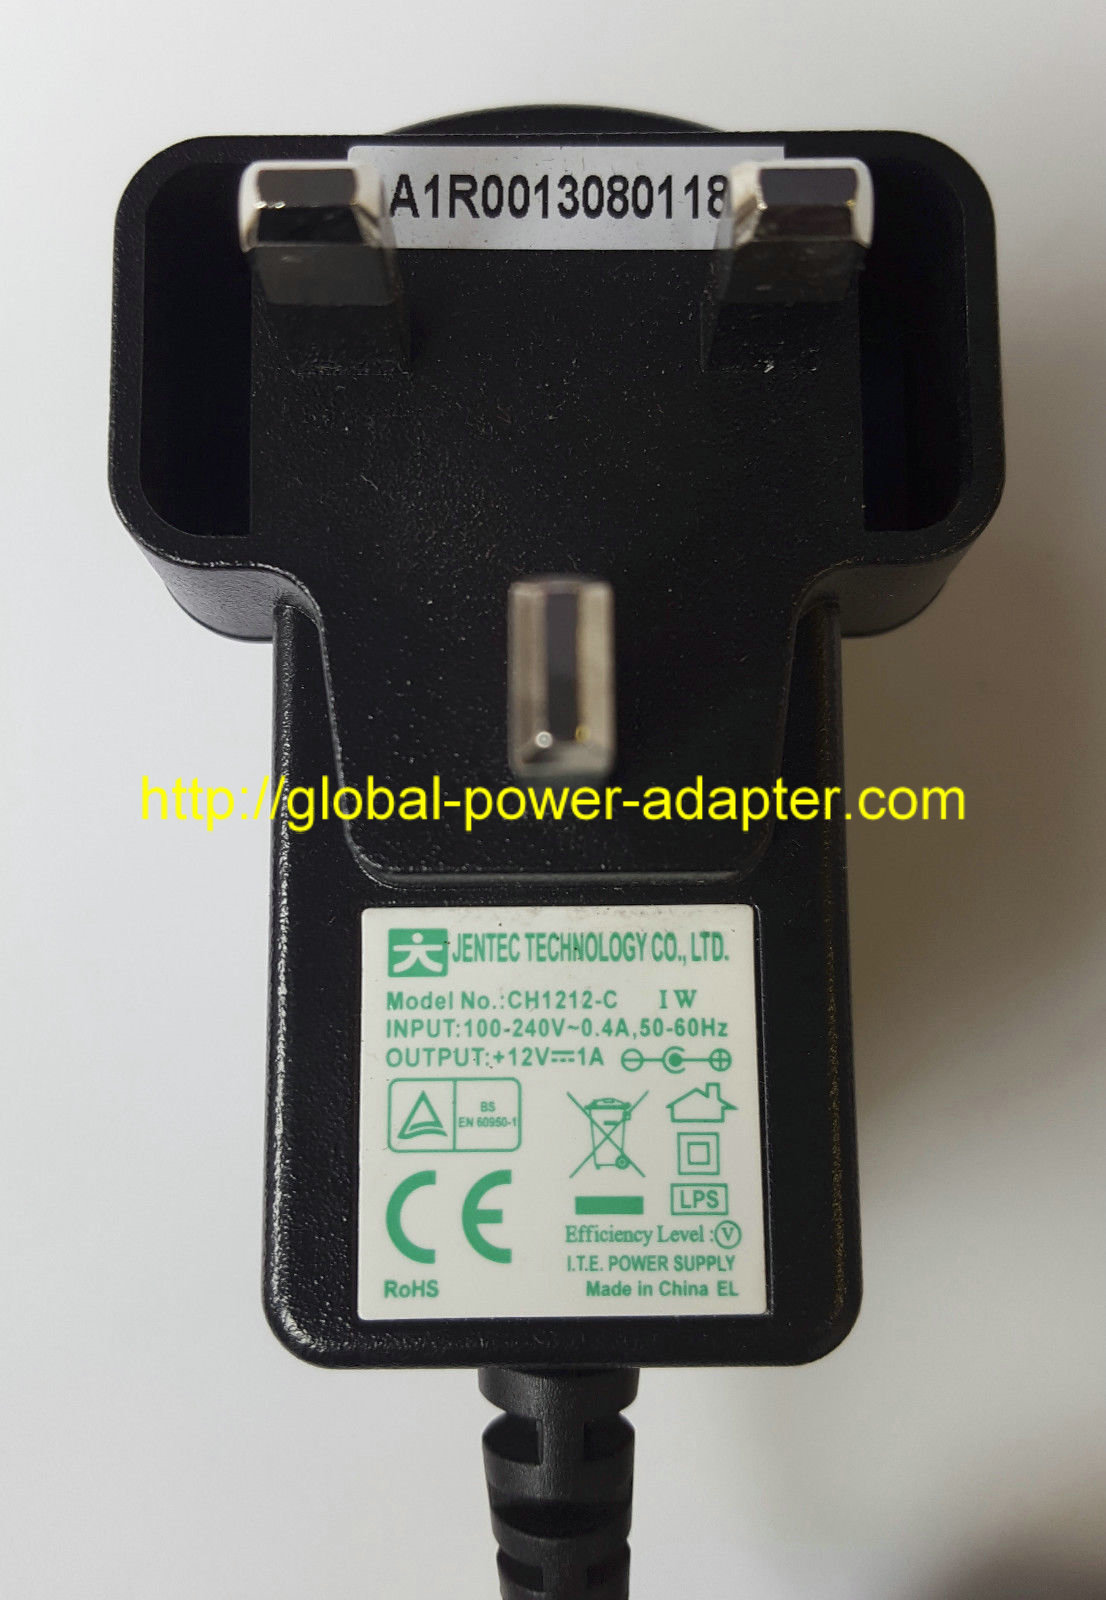 *Brand NEW* 12V 1A AC/DC ADAPTER JENTEC CH1212-C POWER SUPPLY